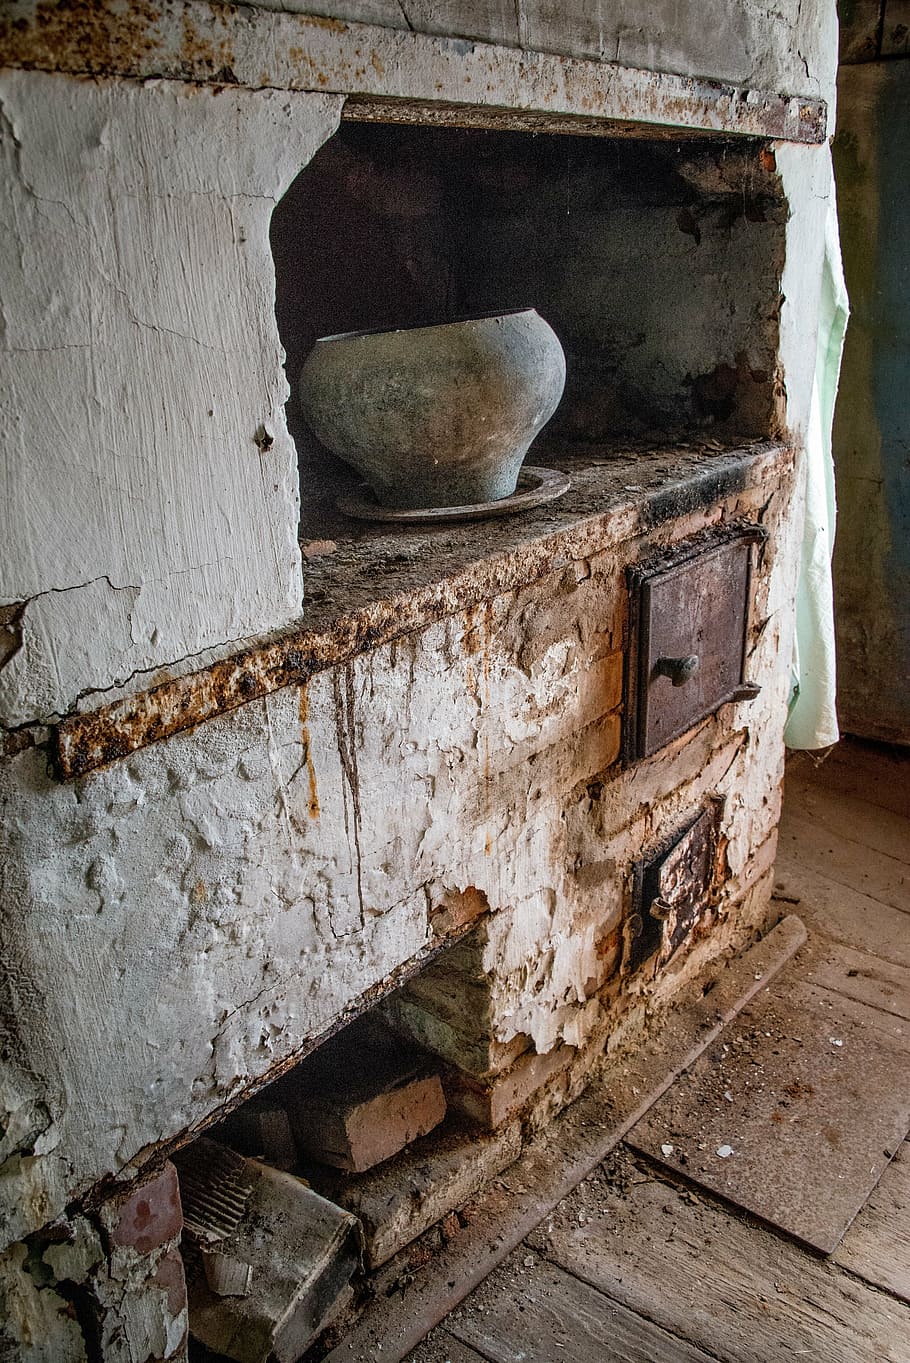 stove, old house, antiquity, old, architecture, abandoned, day, indoors, weathered, obsolete